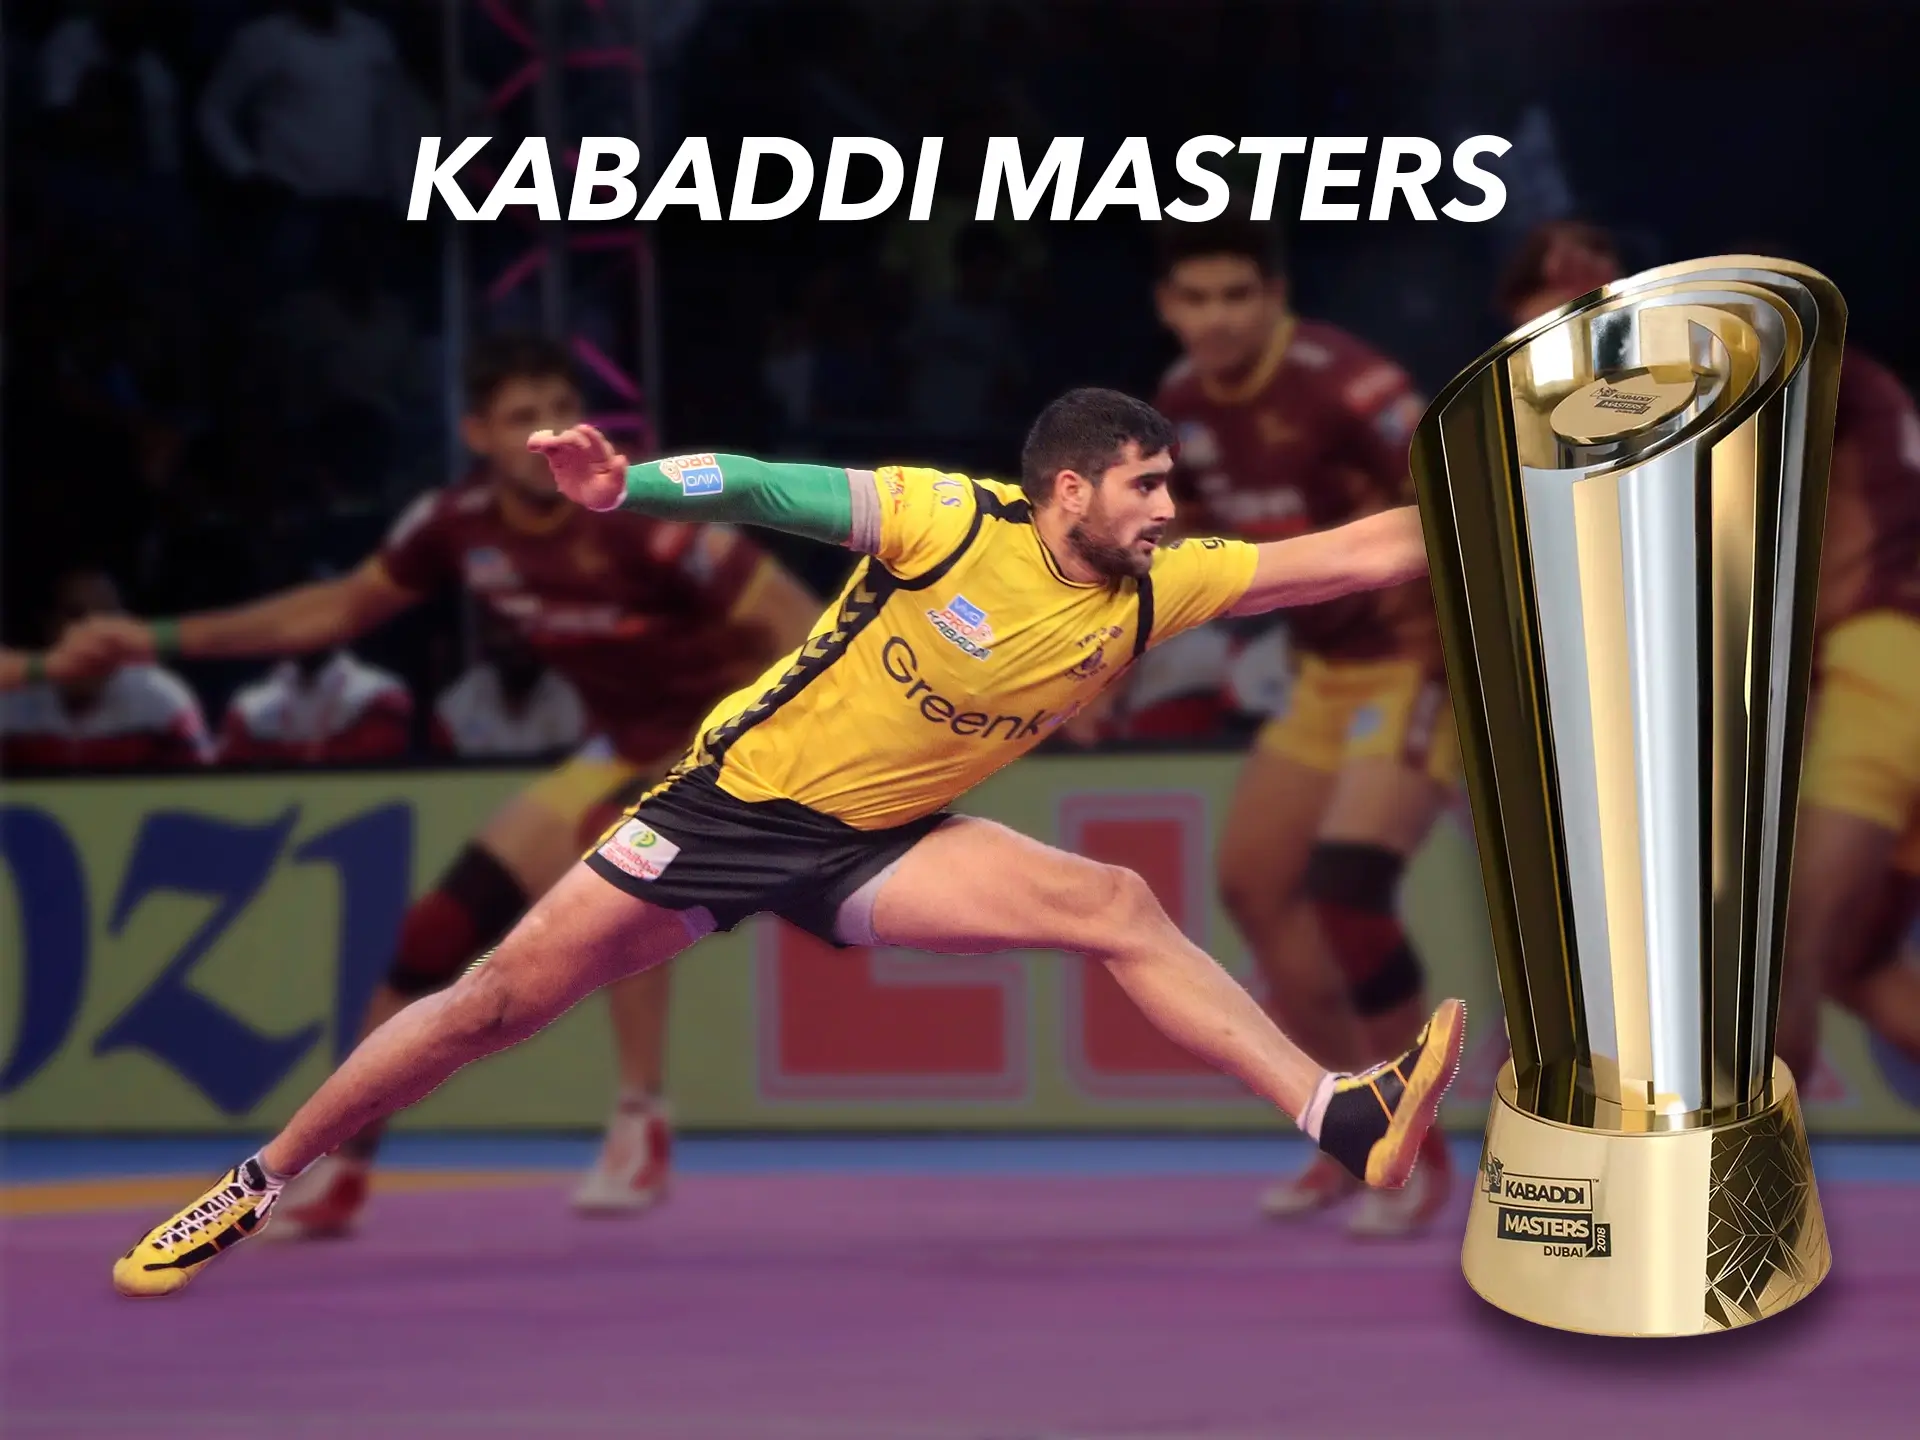 Another famous international Kabaddi tournament in which you can participate and earn a good amount of money.